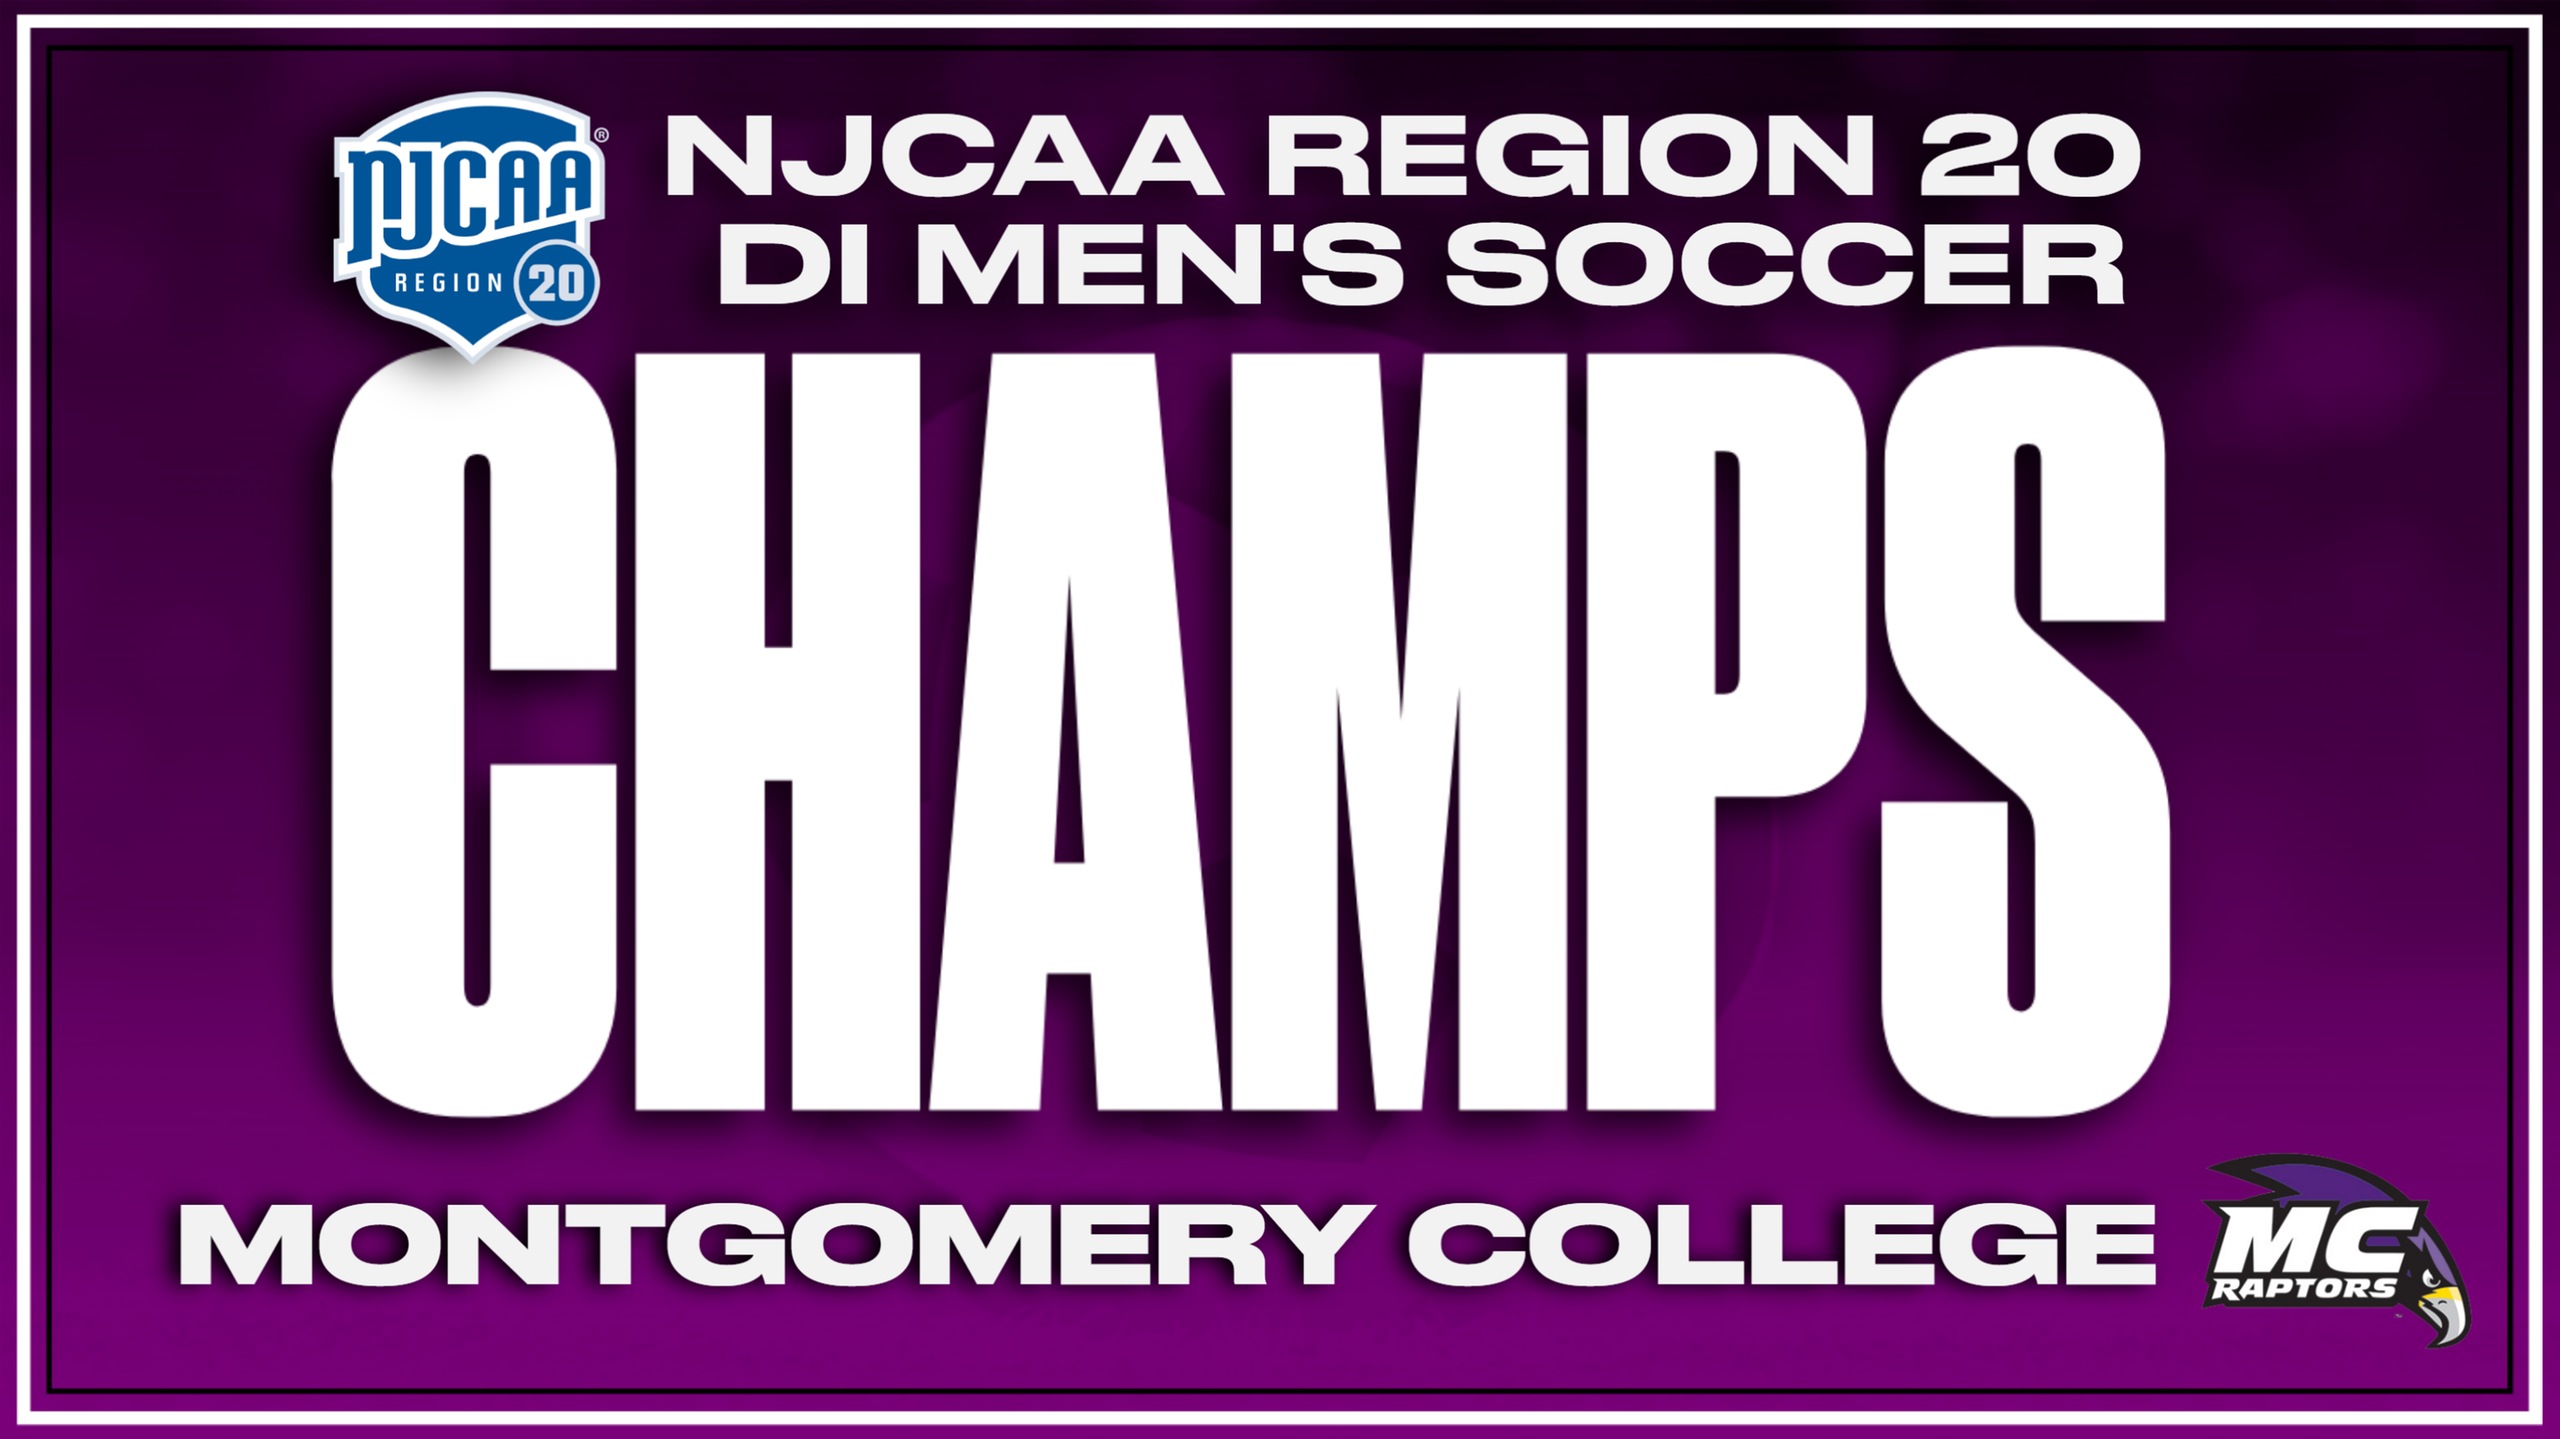 Montgomery Upsets Harford for Men's DI Soccer Region 20 Title